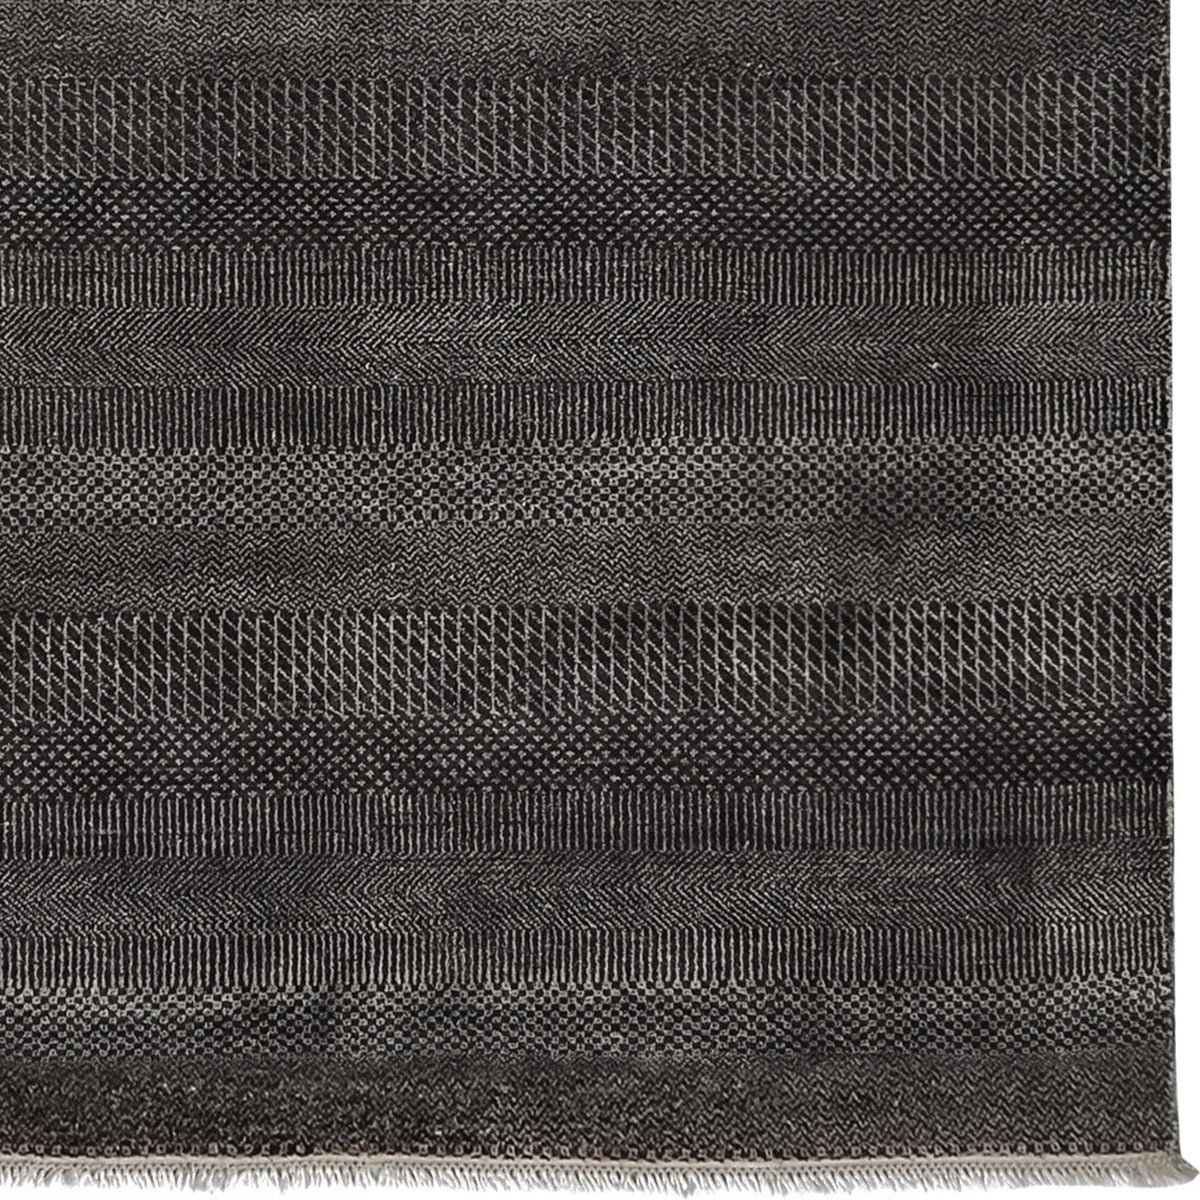 Contemporary Hand-knotted Wool Rug 156cm x 220cm